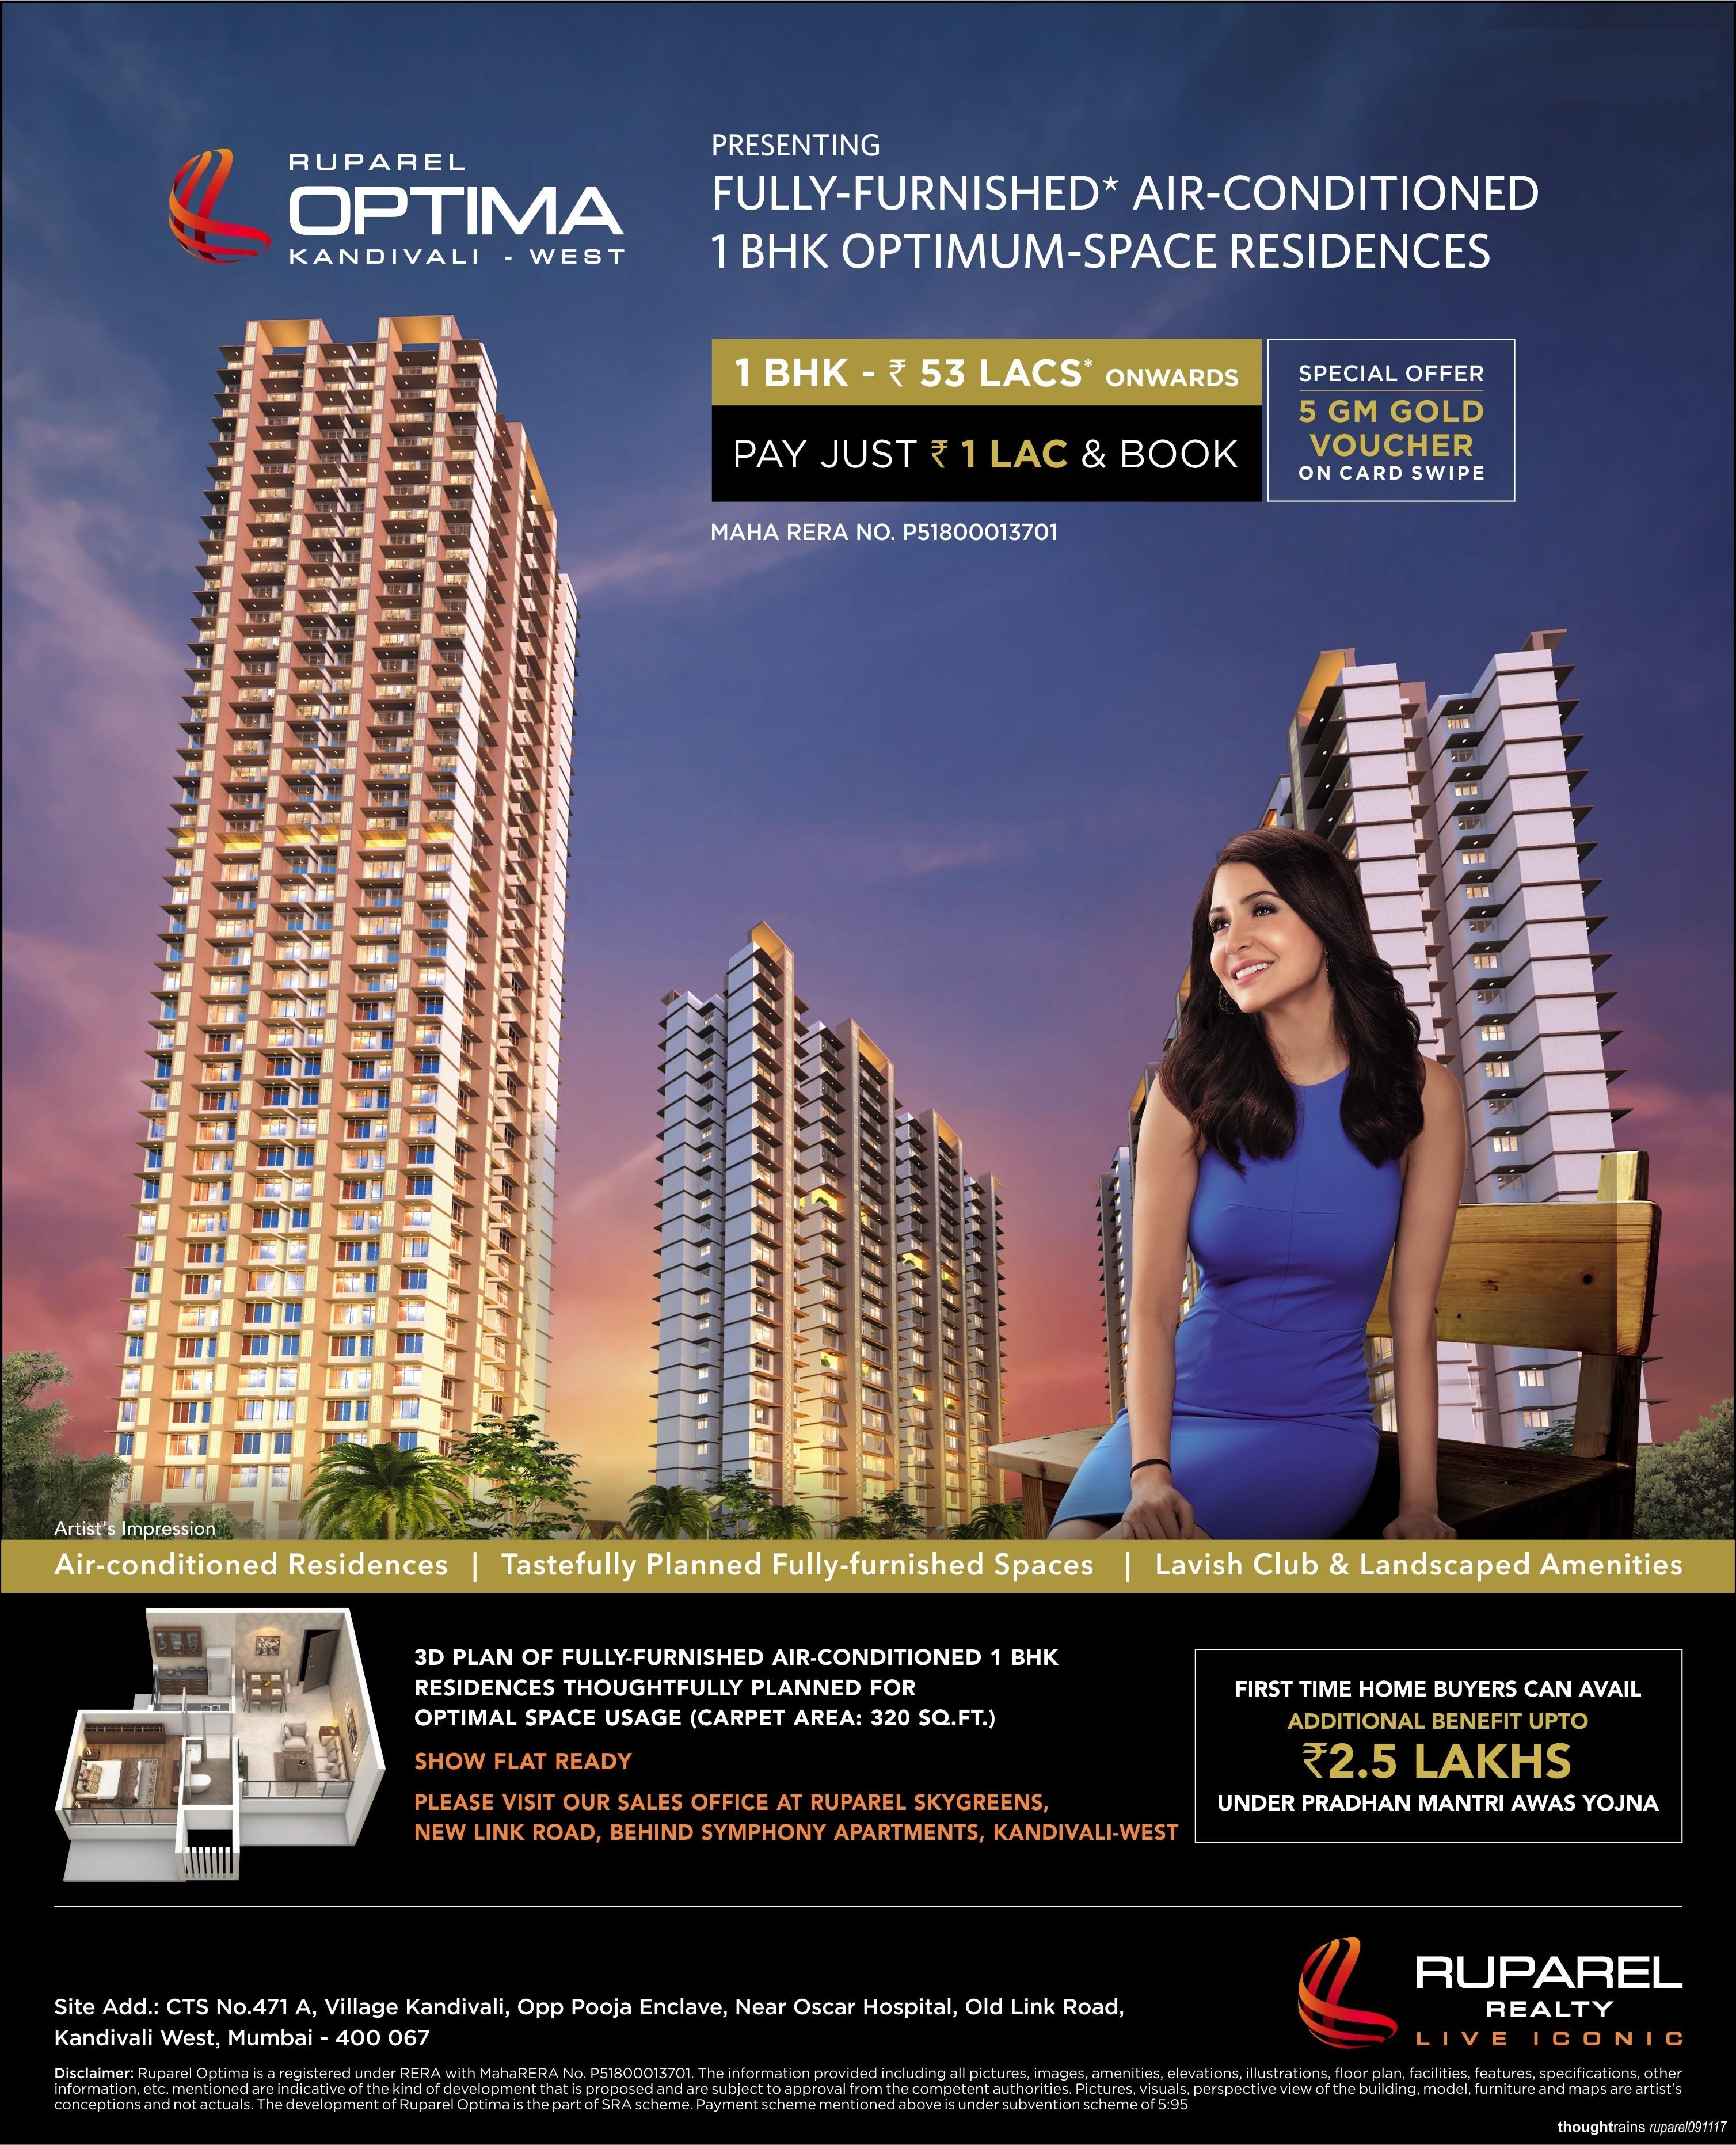 Presenting fully furnished, air-conditioned 1 BHK optimum space residences at Ruparel Optima in Mumbai Update